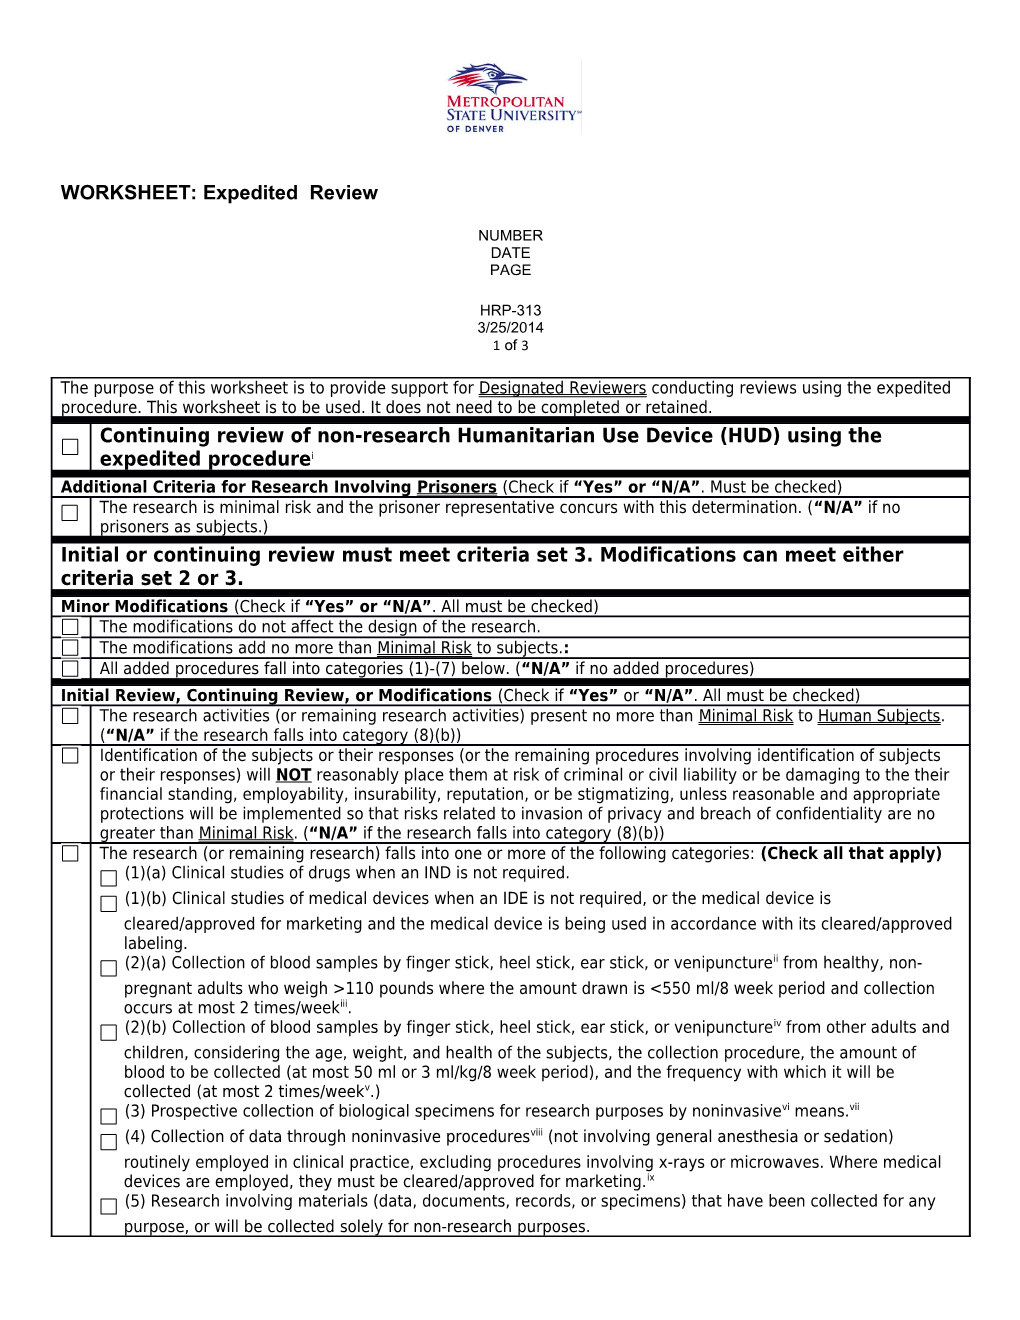 WORKSHEET: Eligibility for Review Using the Expedited Procedure